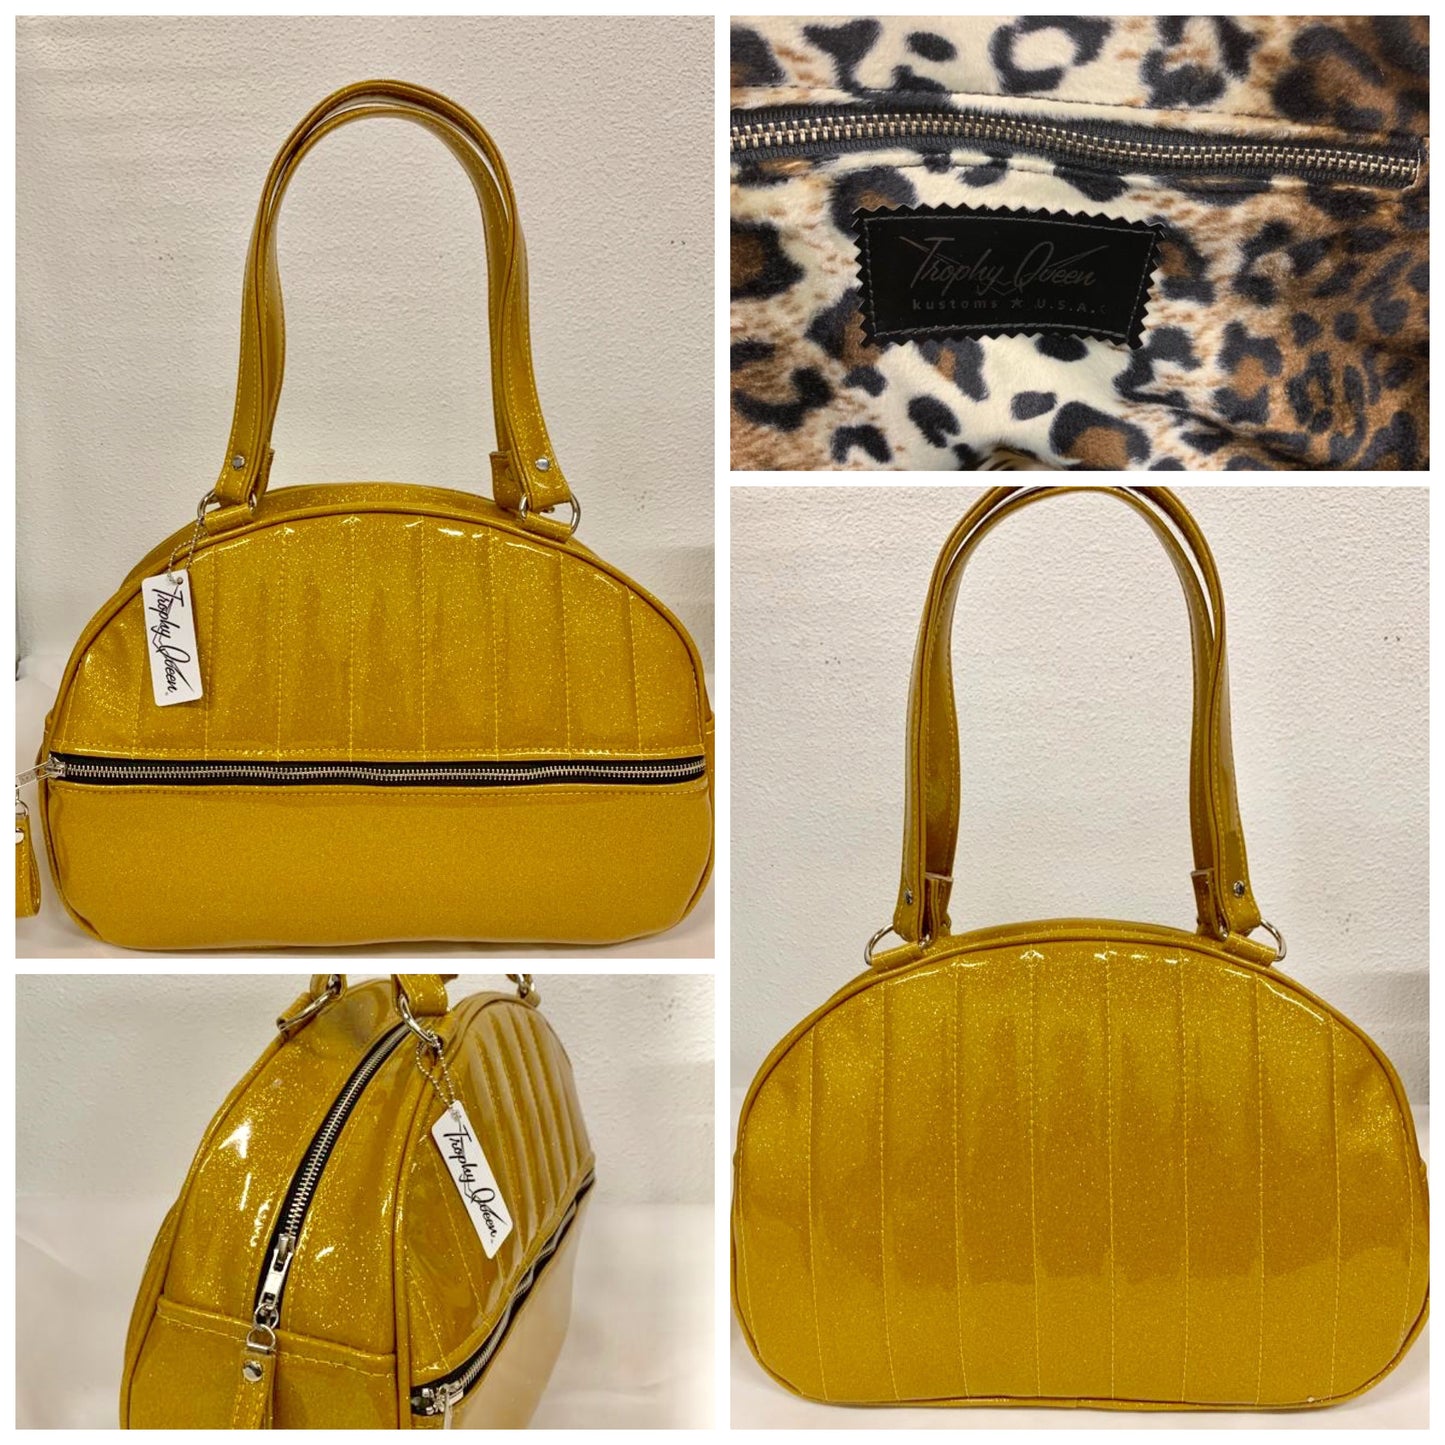 Lucky Strike Bowling Style Bag made with Marigold Glitter Vinyl and lined with Plush Leopard inside with front zipper pocket, shoulder straps with extra set included inside has divided pocket, zipper pocket with hidden serial number inside and signature trophy queen label.